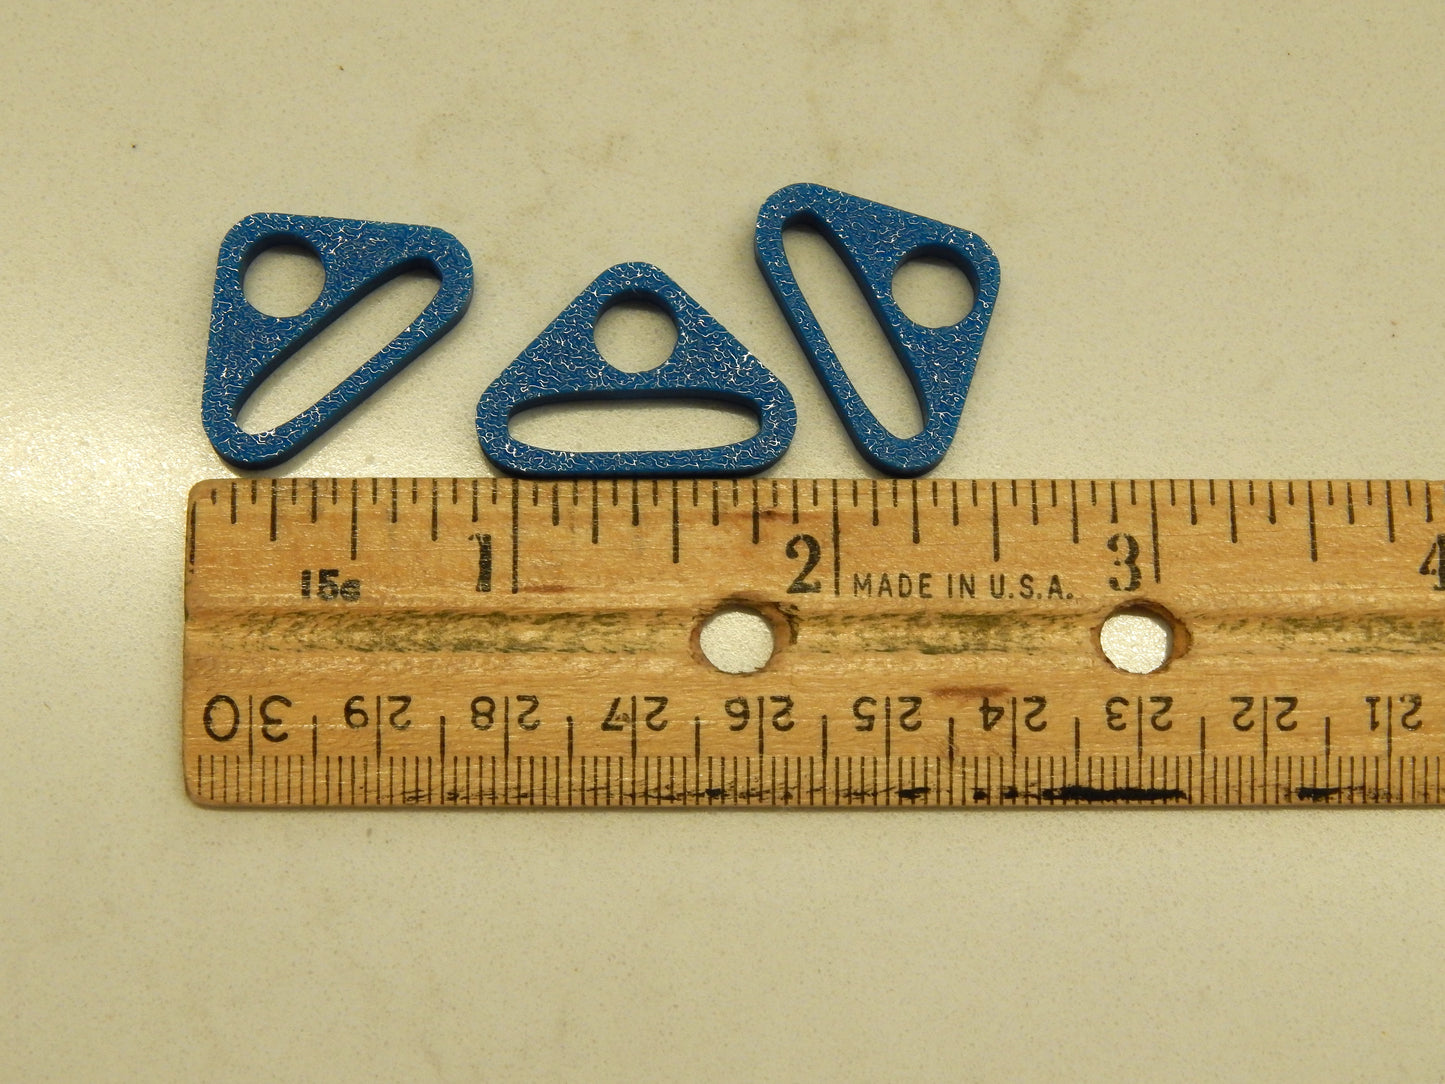 Plastic Triangle Rings - Multiple Sizes and Colors - Made in Kansas City